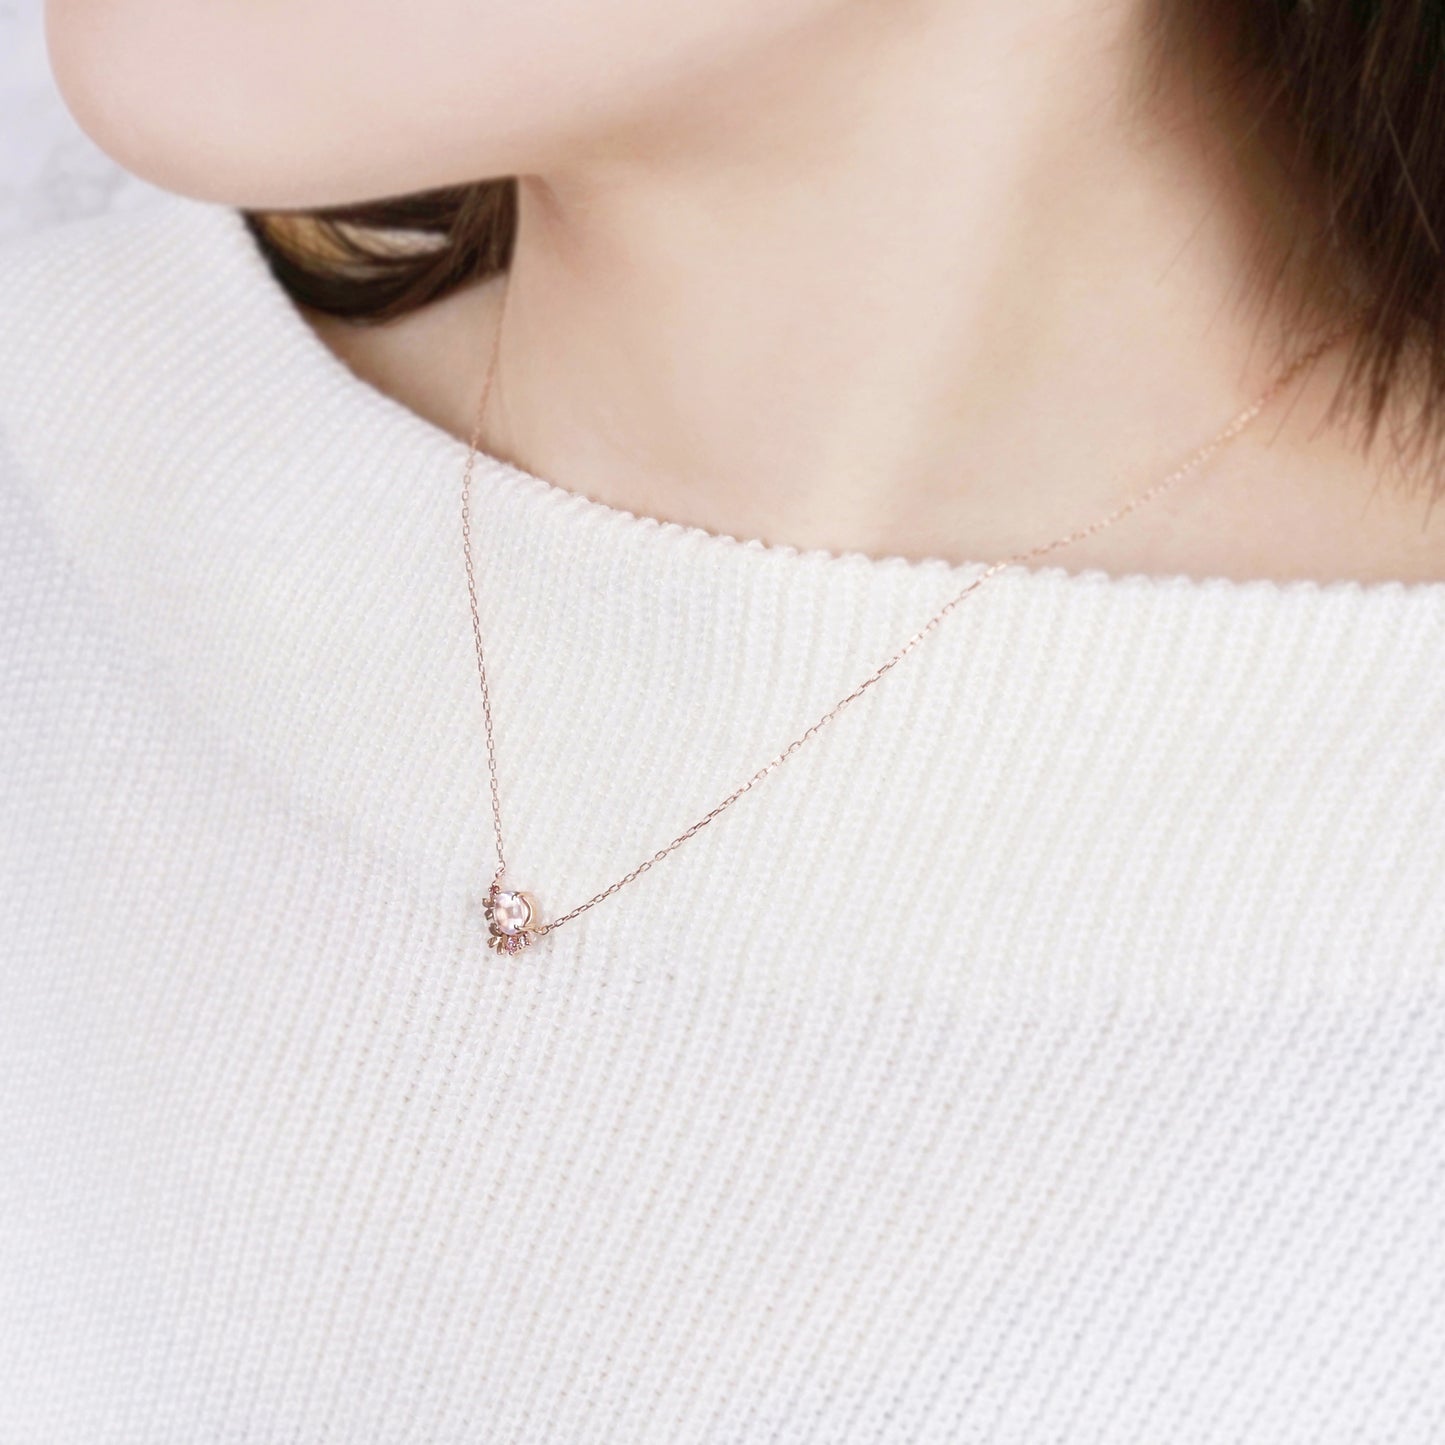 [Birth Flower Jewelry] April - Cherry Blossoms Necklace (10K Rose Gold) - Model Image